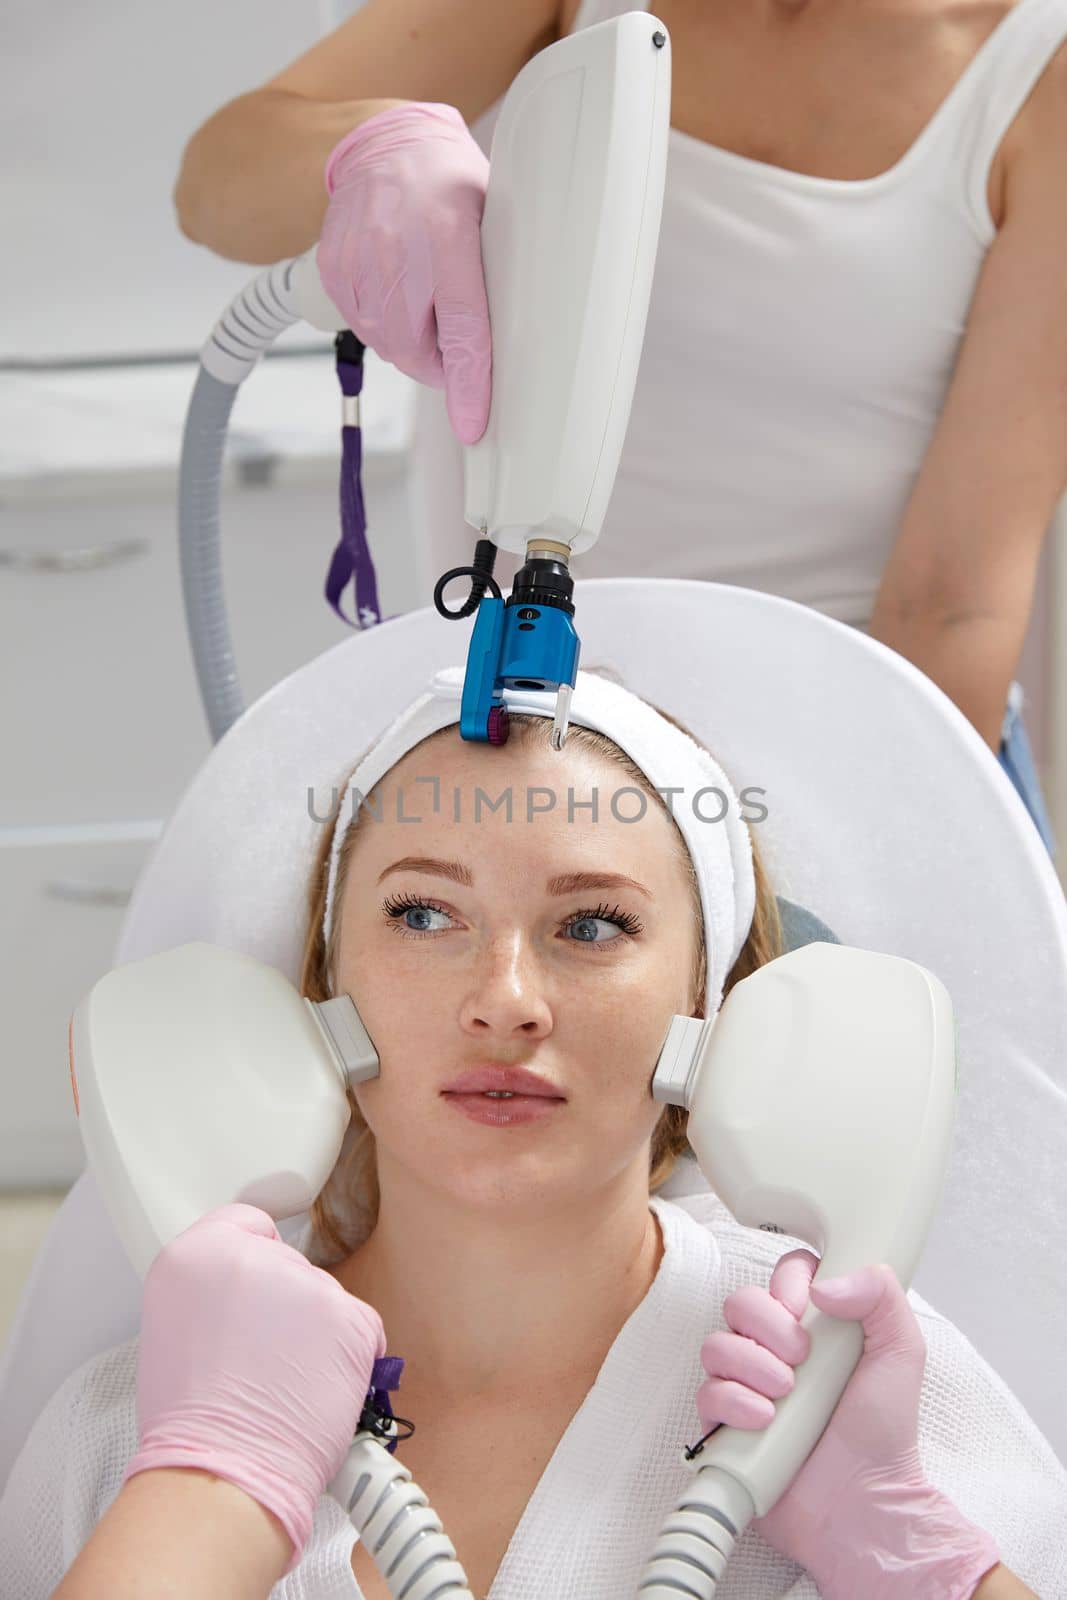 Conceptual beauty and cosmetology image of hands of several doctors holding laser equipment over female face. Cosmetology concept